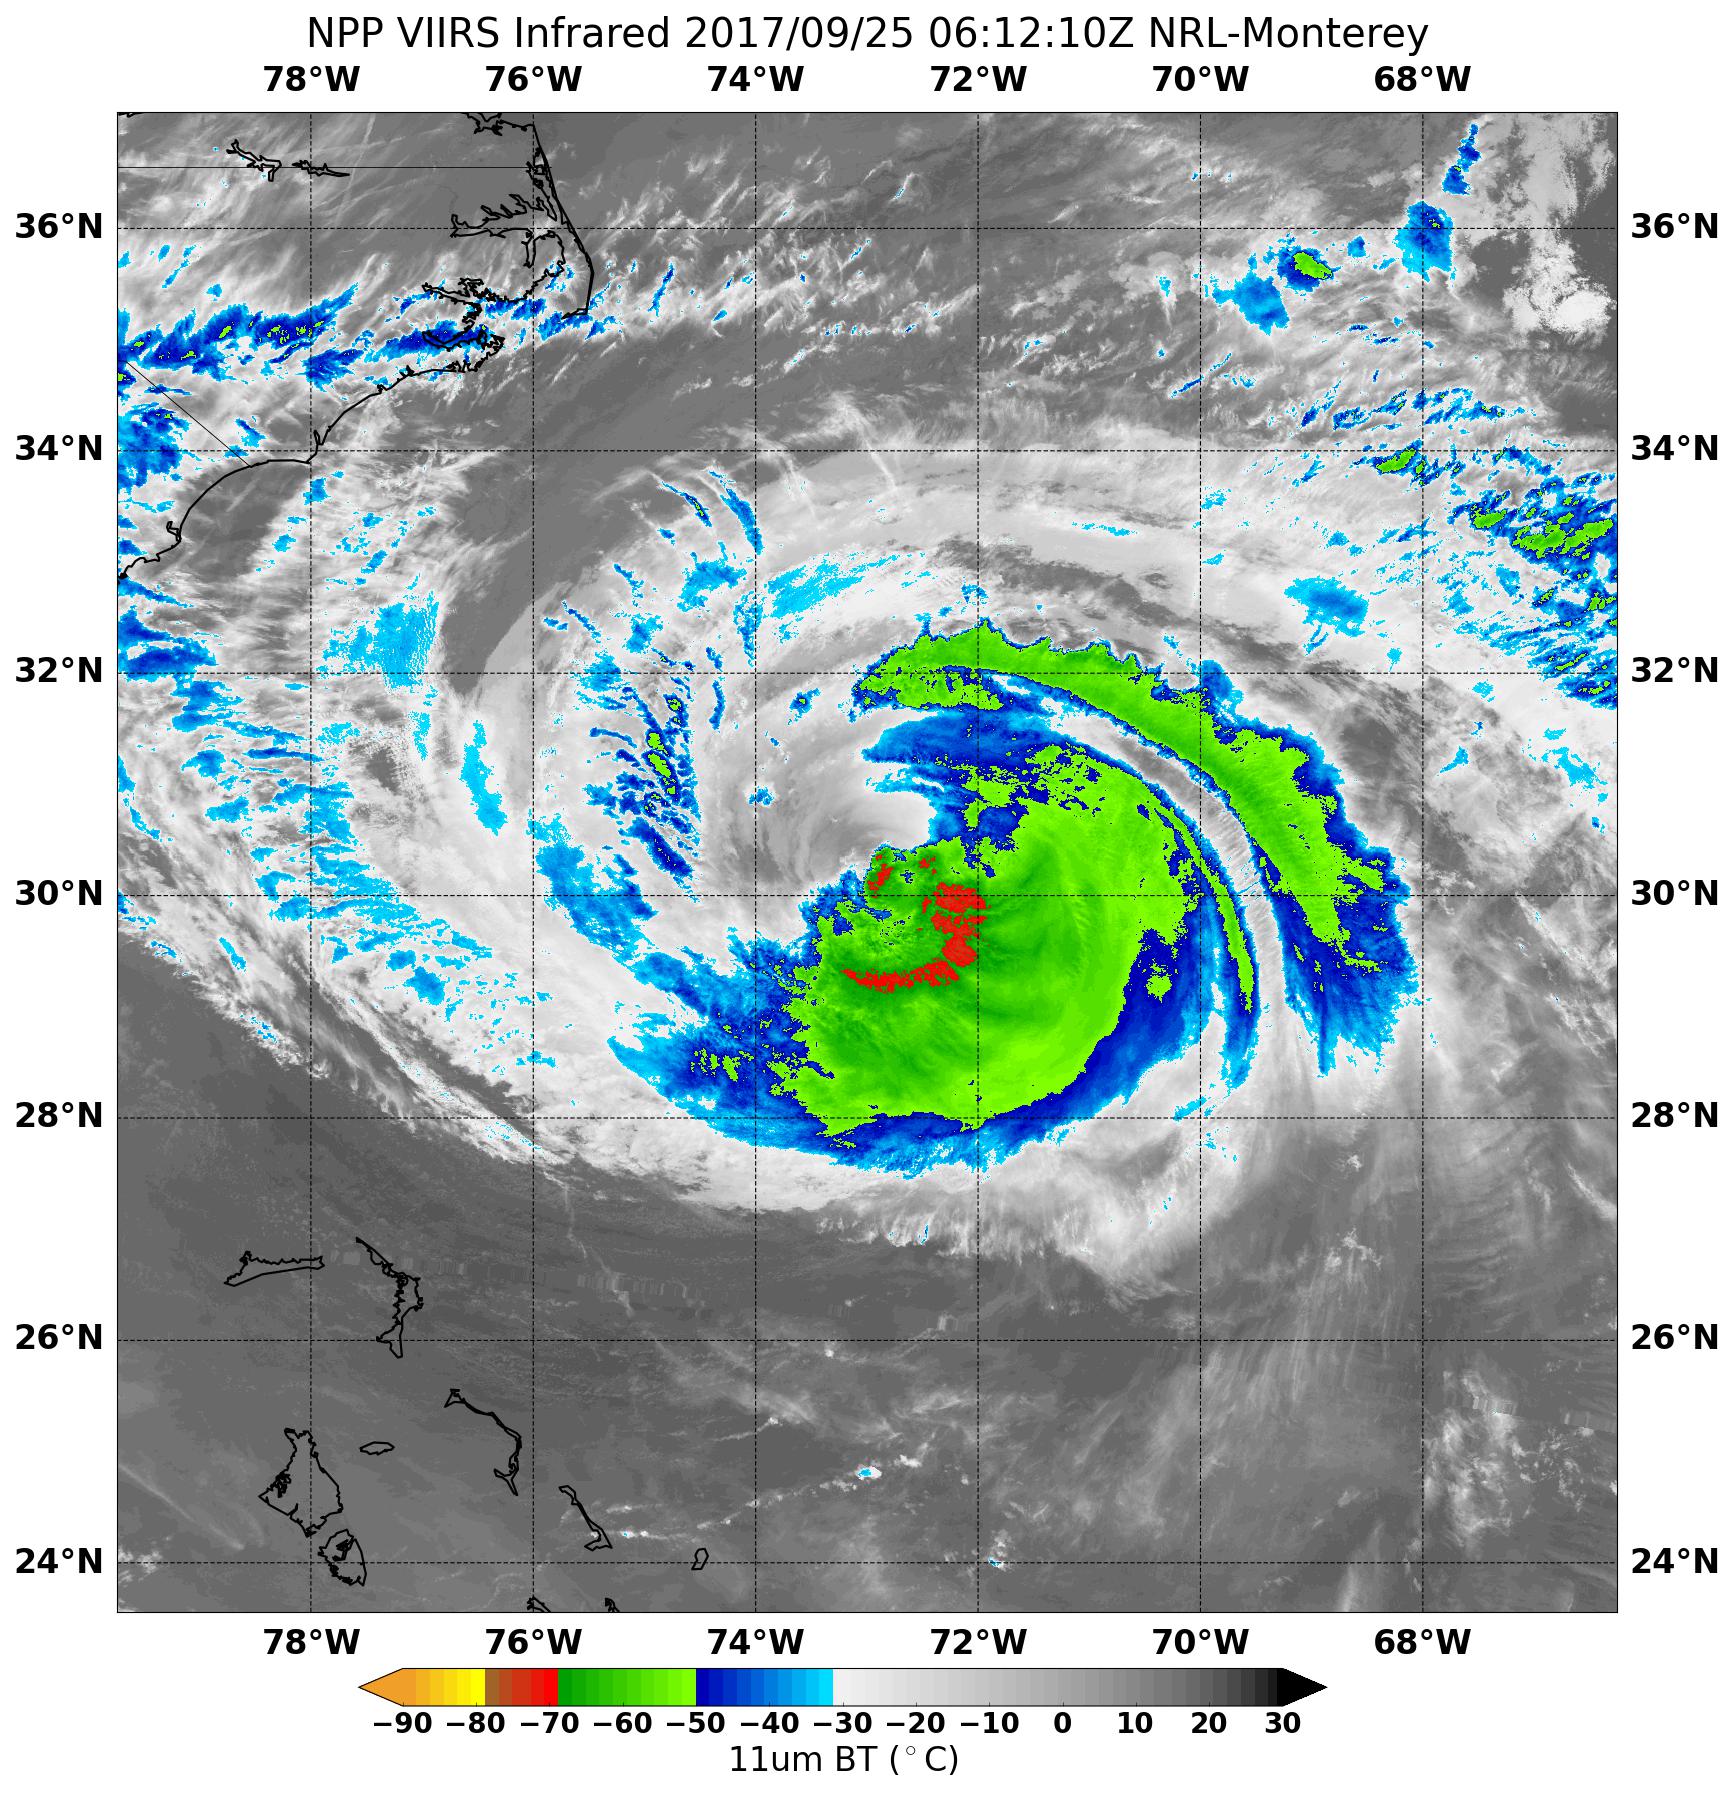 Suomi NPP infrared image of Maria with cloud temperatures in red, green, and blue.